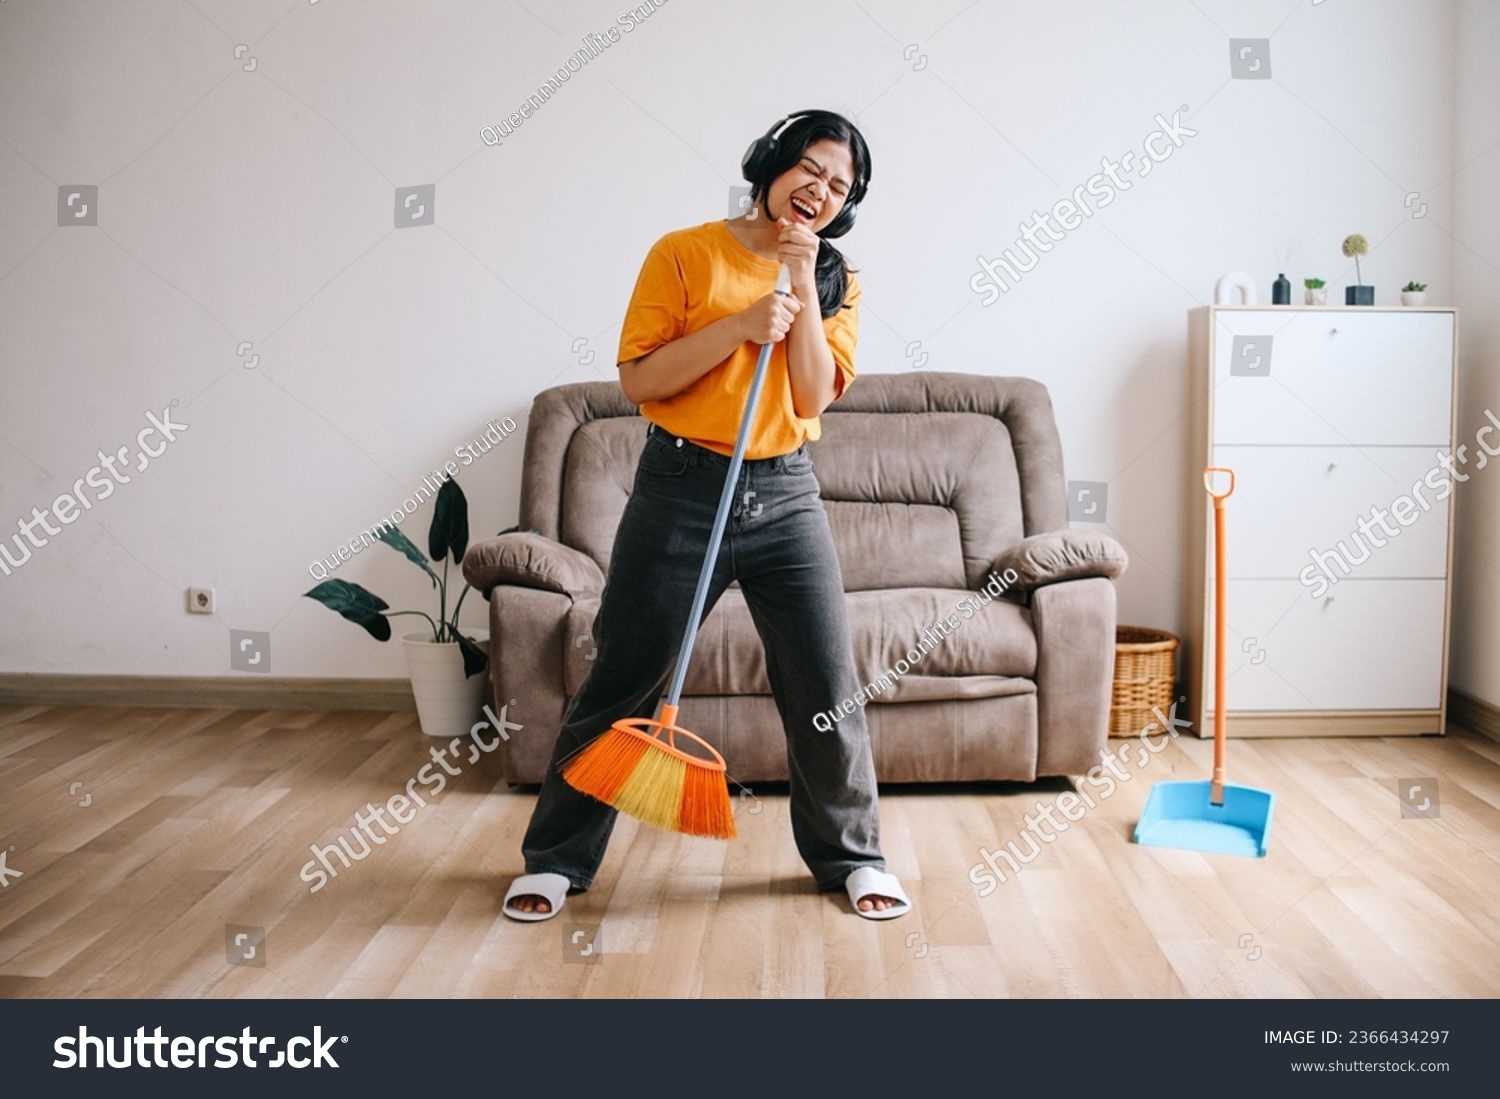 Cheerful young Asian woman in headphones using broom handle as microphone and having fun while cleaning house #2366434297